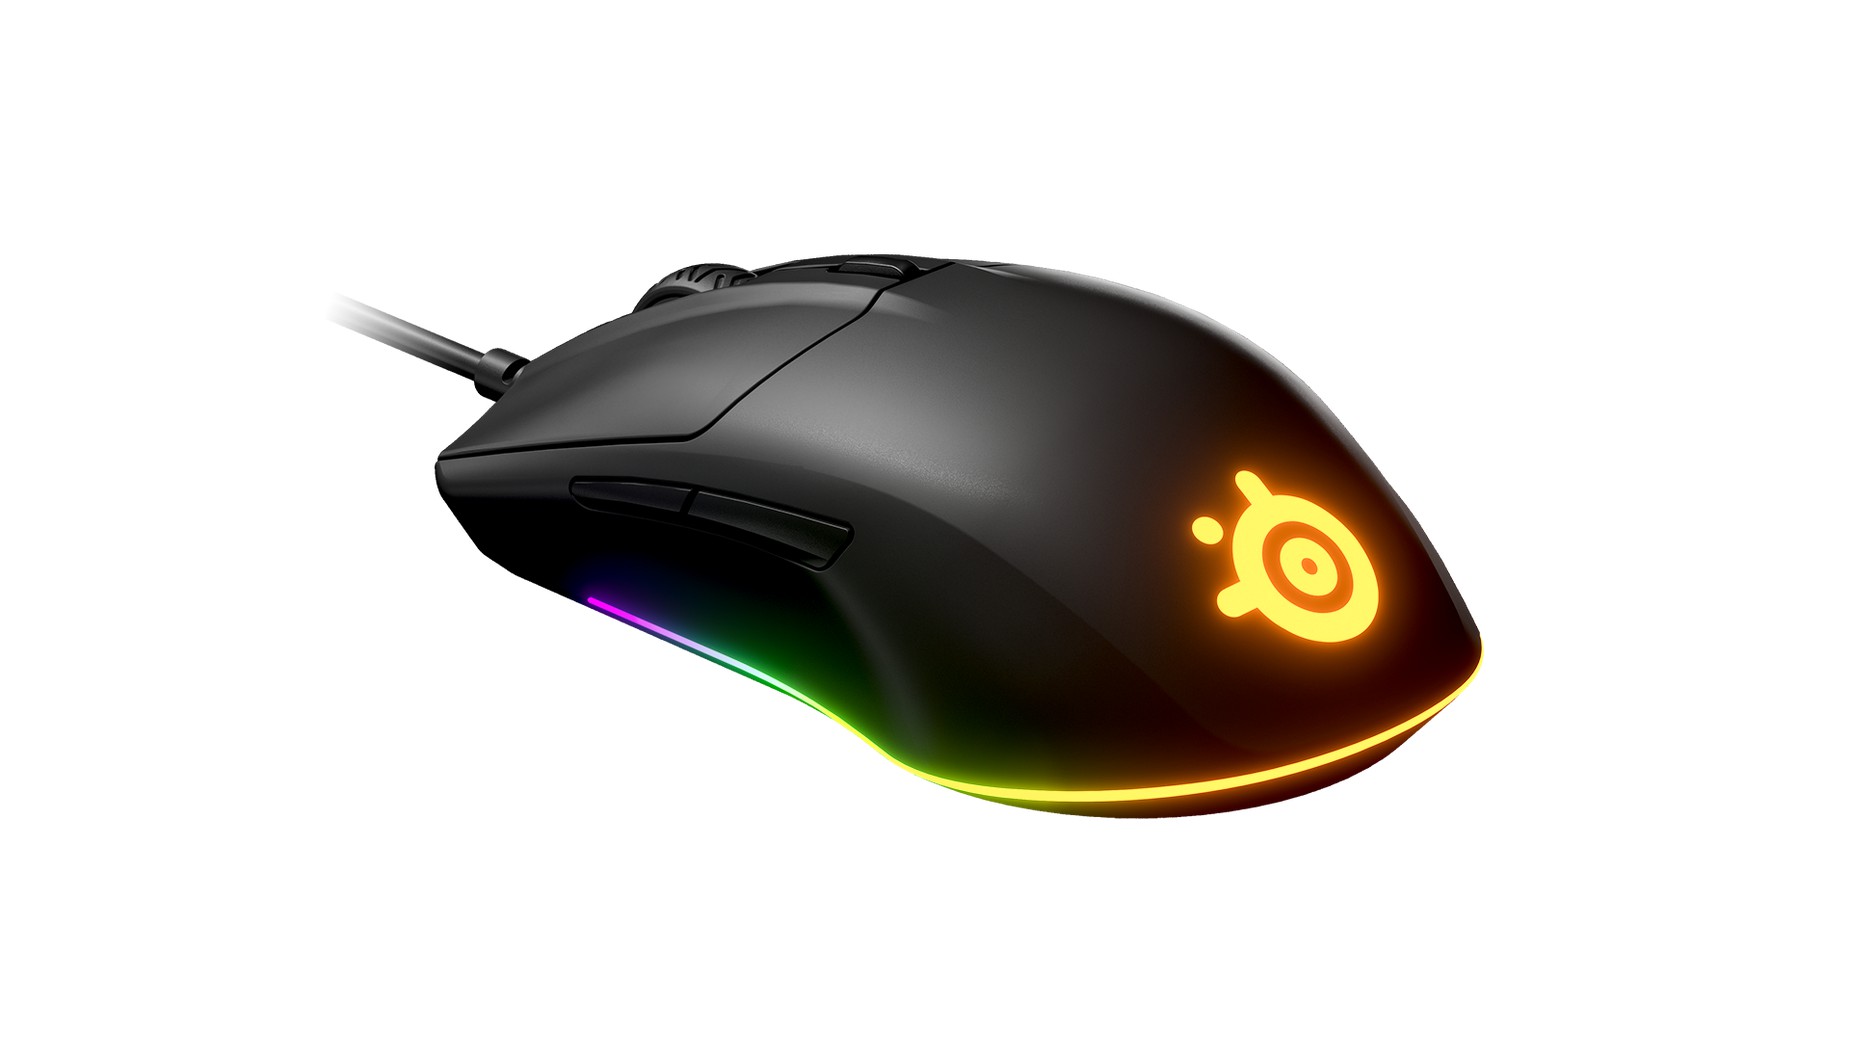 Steelseries Rival 3 Ergonomic Mouse gaming mouse